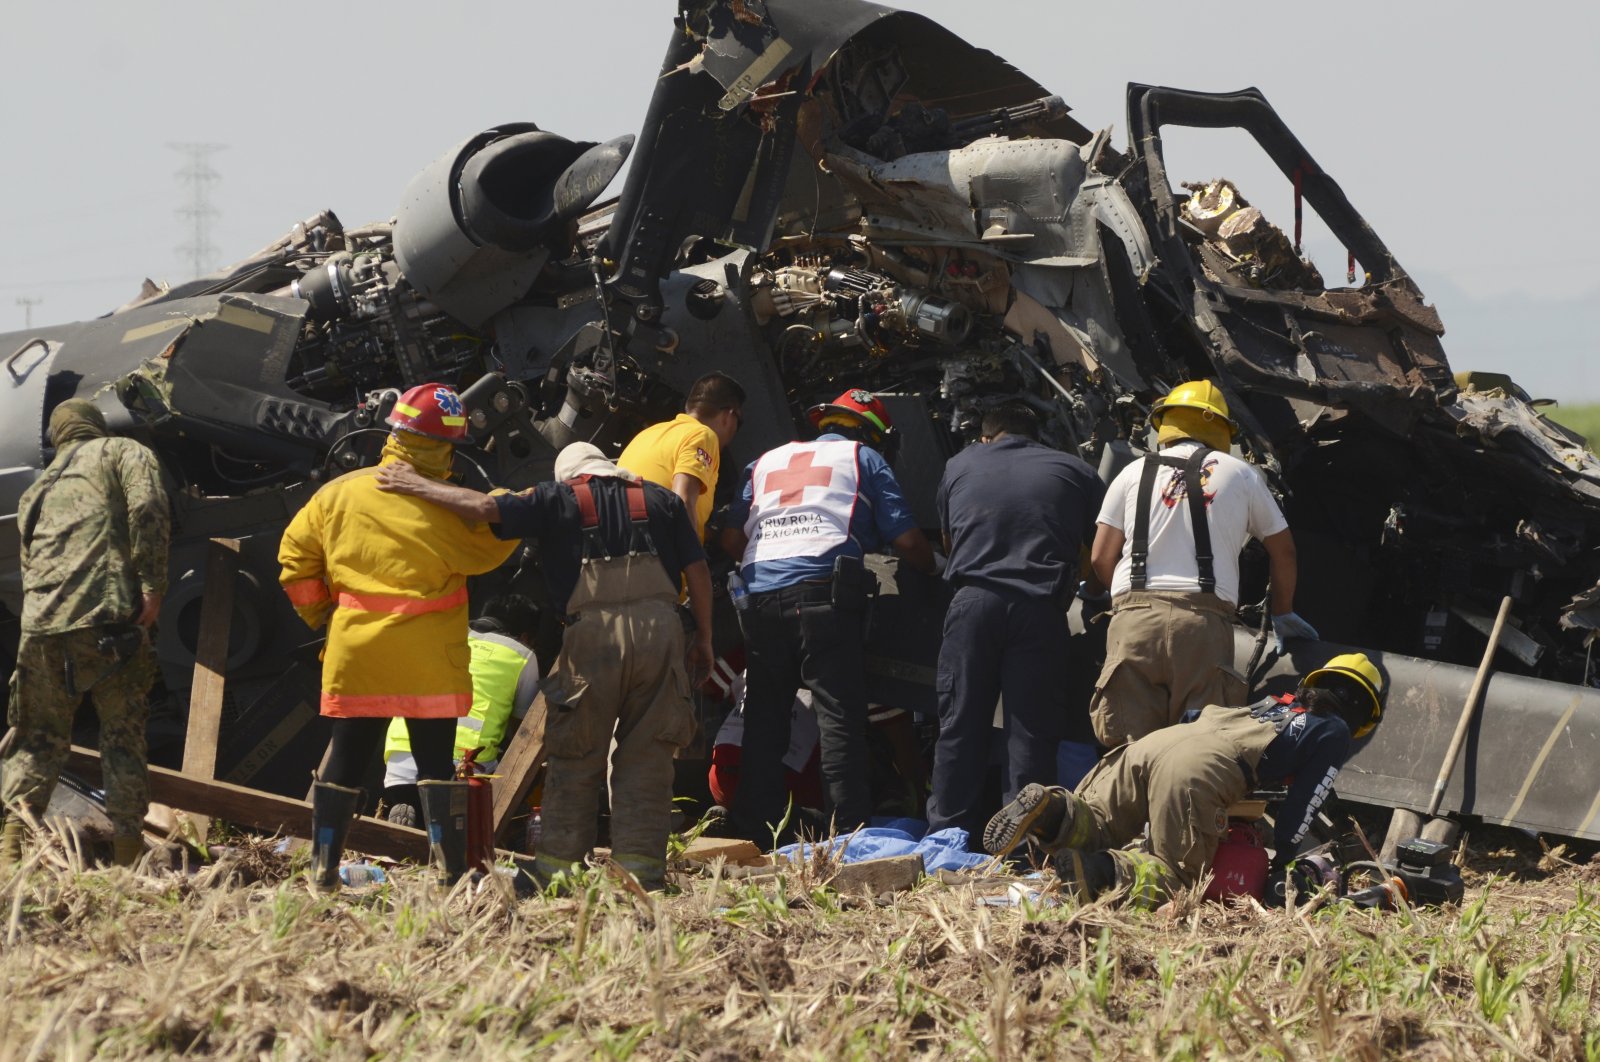 Emergency personnel work next to a Mexican navy helicopter that crashed after providing support for the operation that captured drug lord Rafael Caro Quintero, near Los Mochis, Sinaloa state, Mexico, July 15, 2022. (AP Photo)